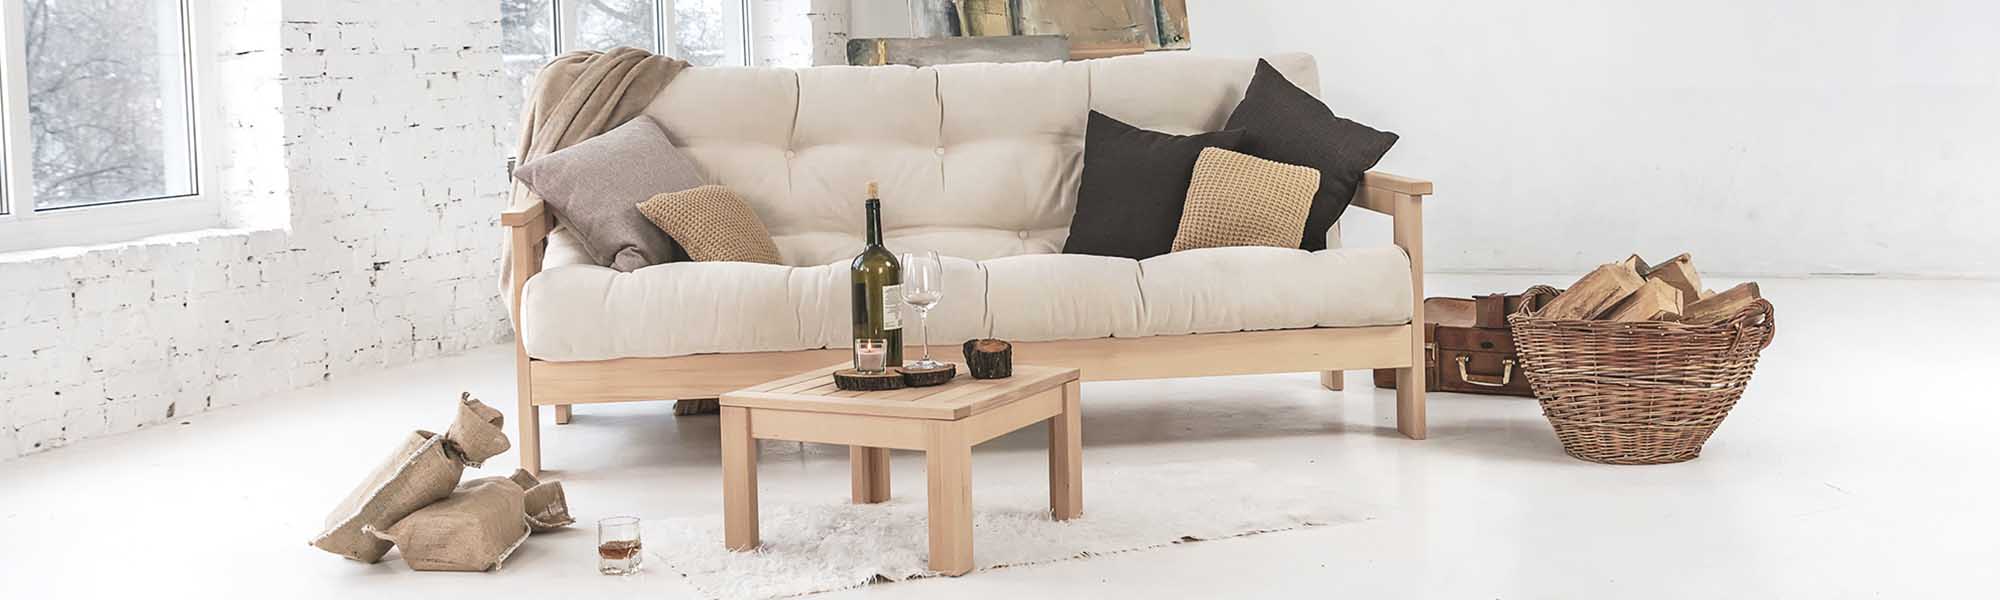 A wooden sofa with a soft cream-colored mattress and a wooden coffee table in a bright living room